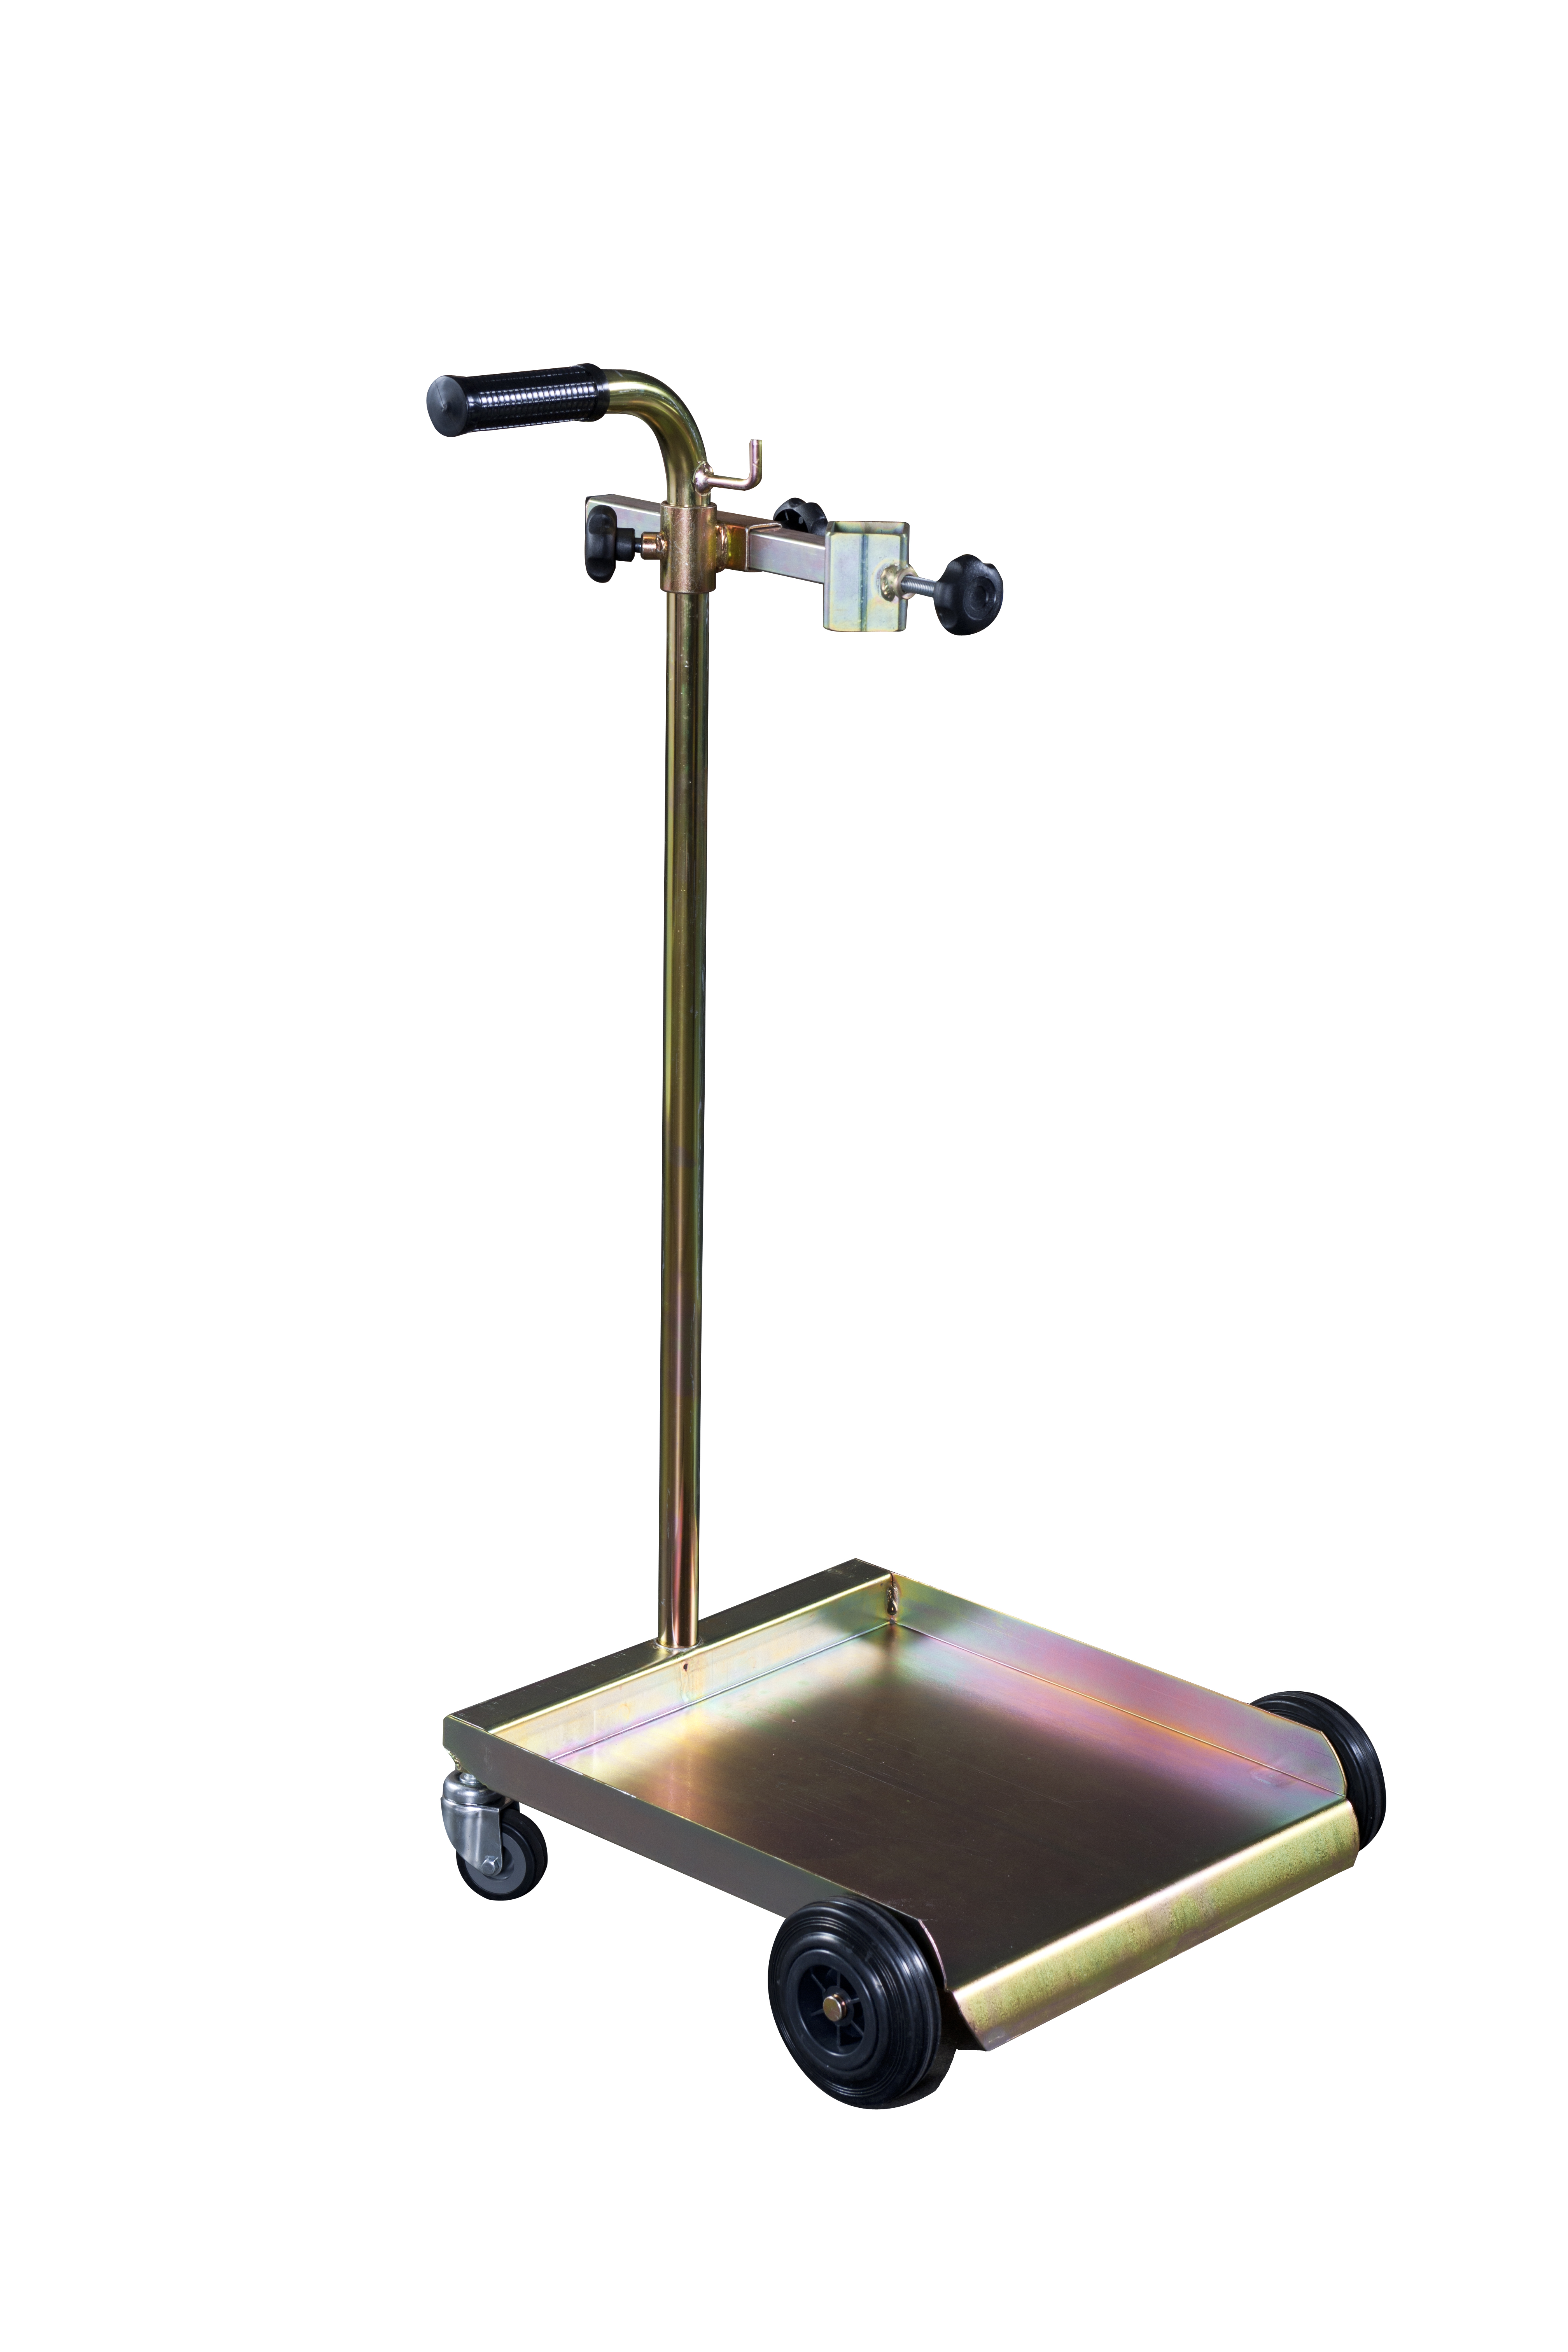 TROLLEY FOR 20-60 KG.DRUMS